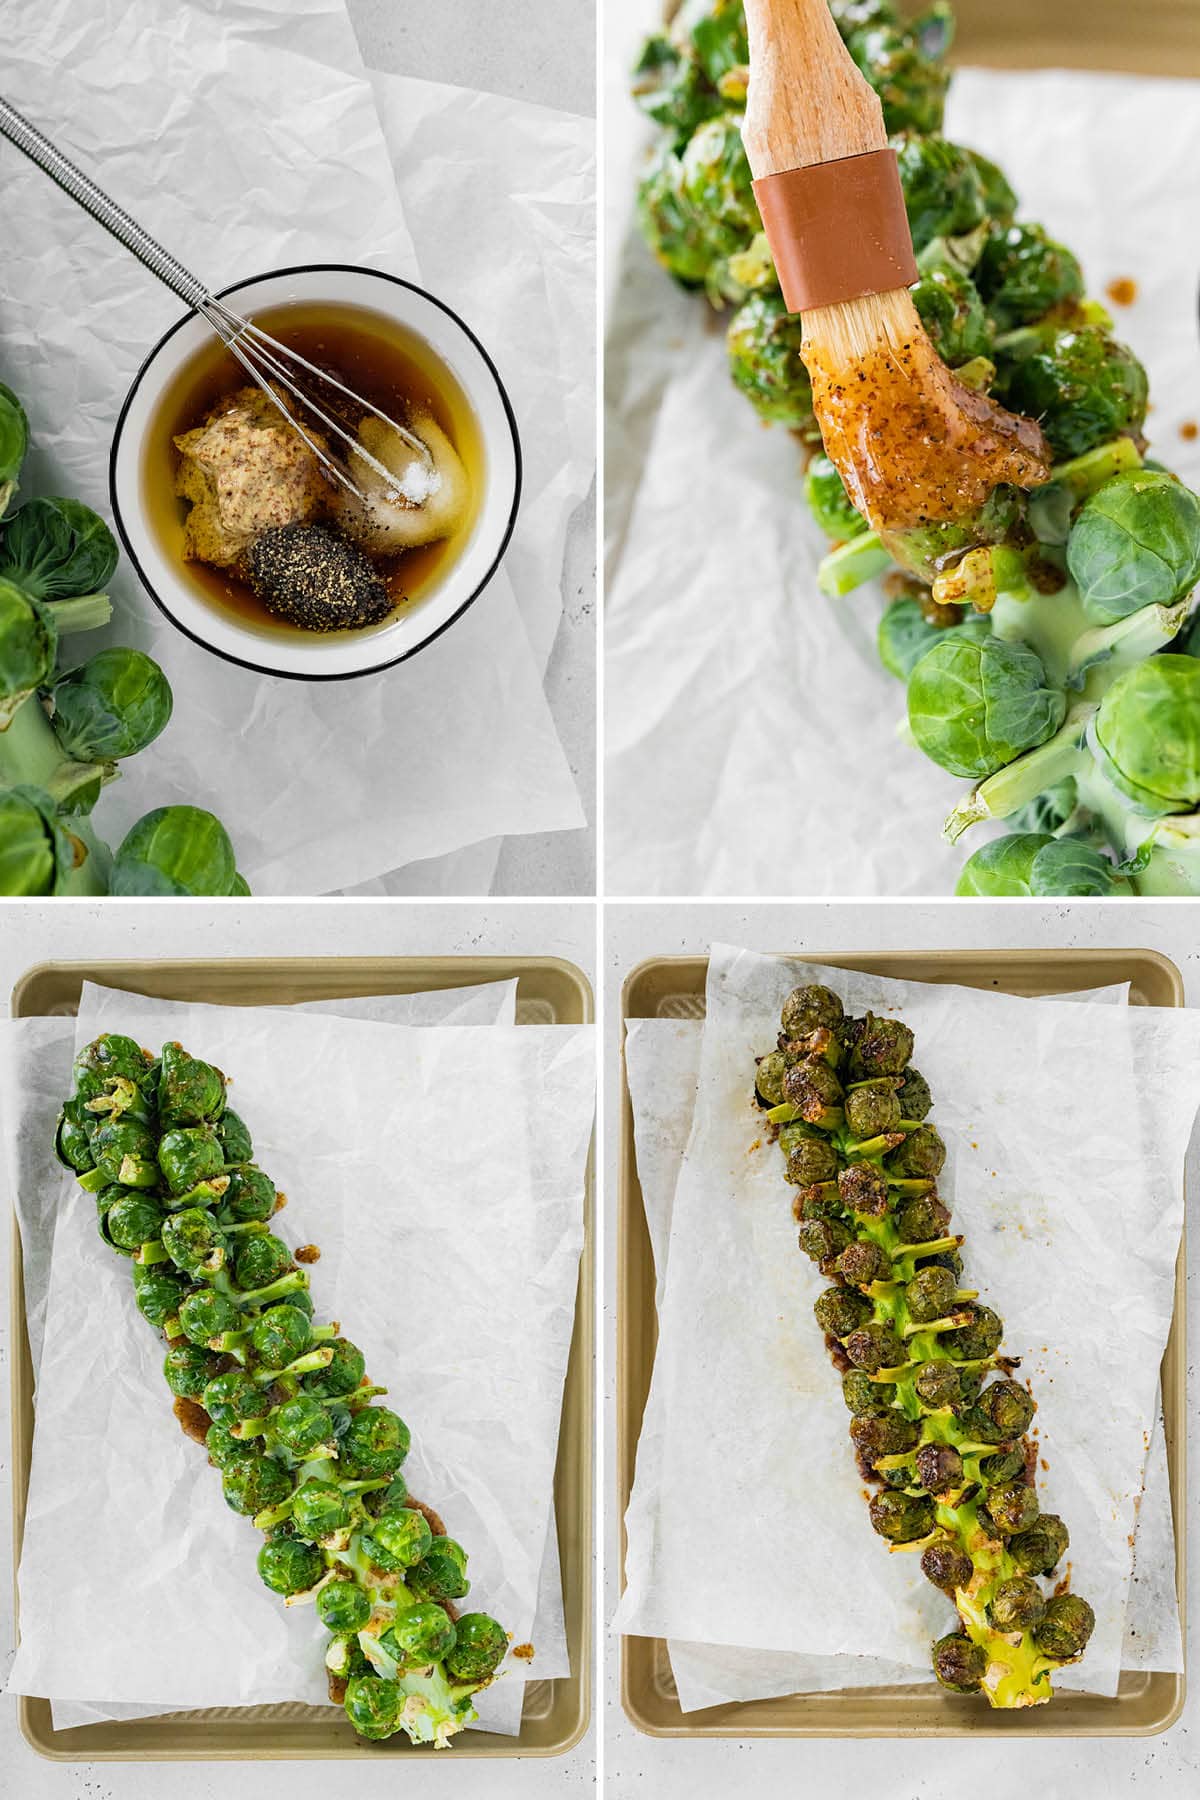 Four photos showing the steps to make Brussels Sprouts on the Stalk: making honey mustard to brush on the stalk, and then roasting.